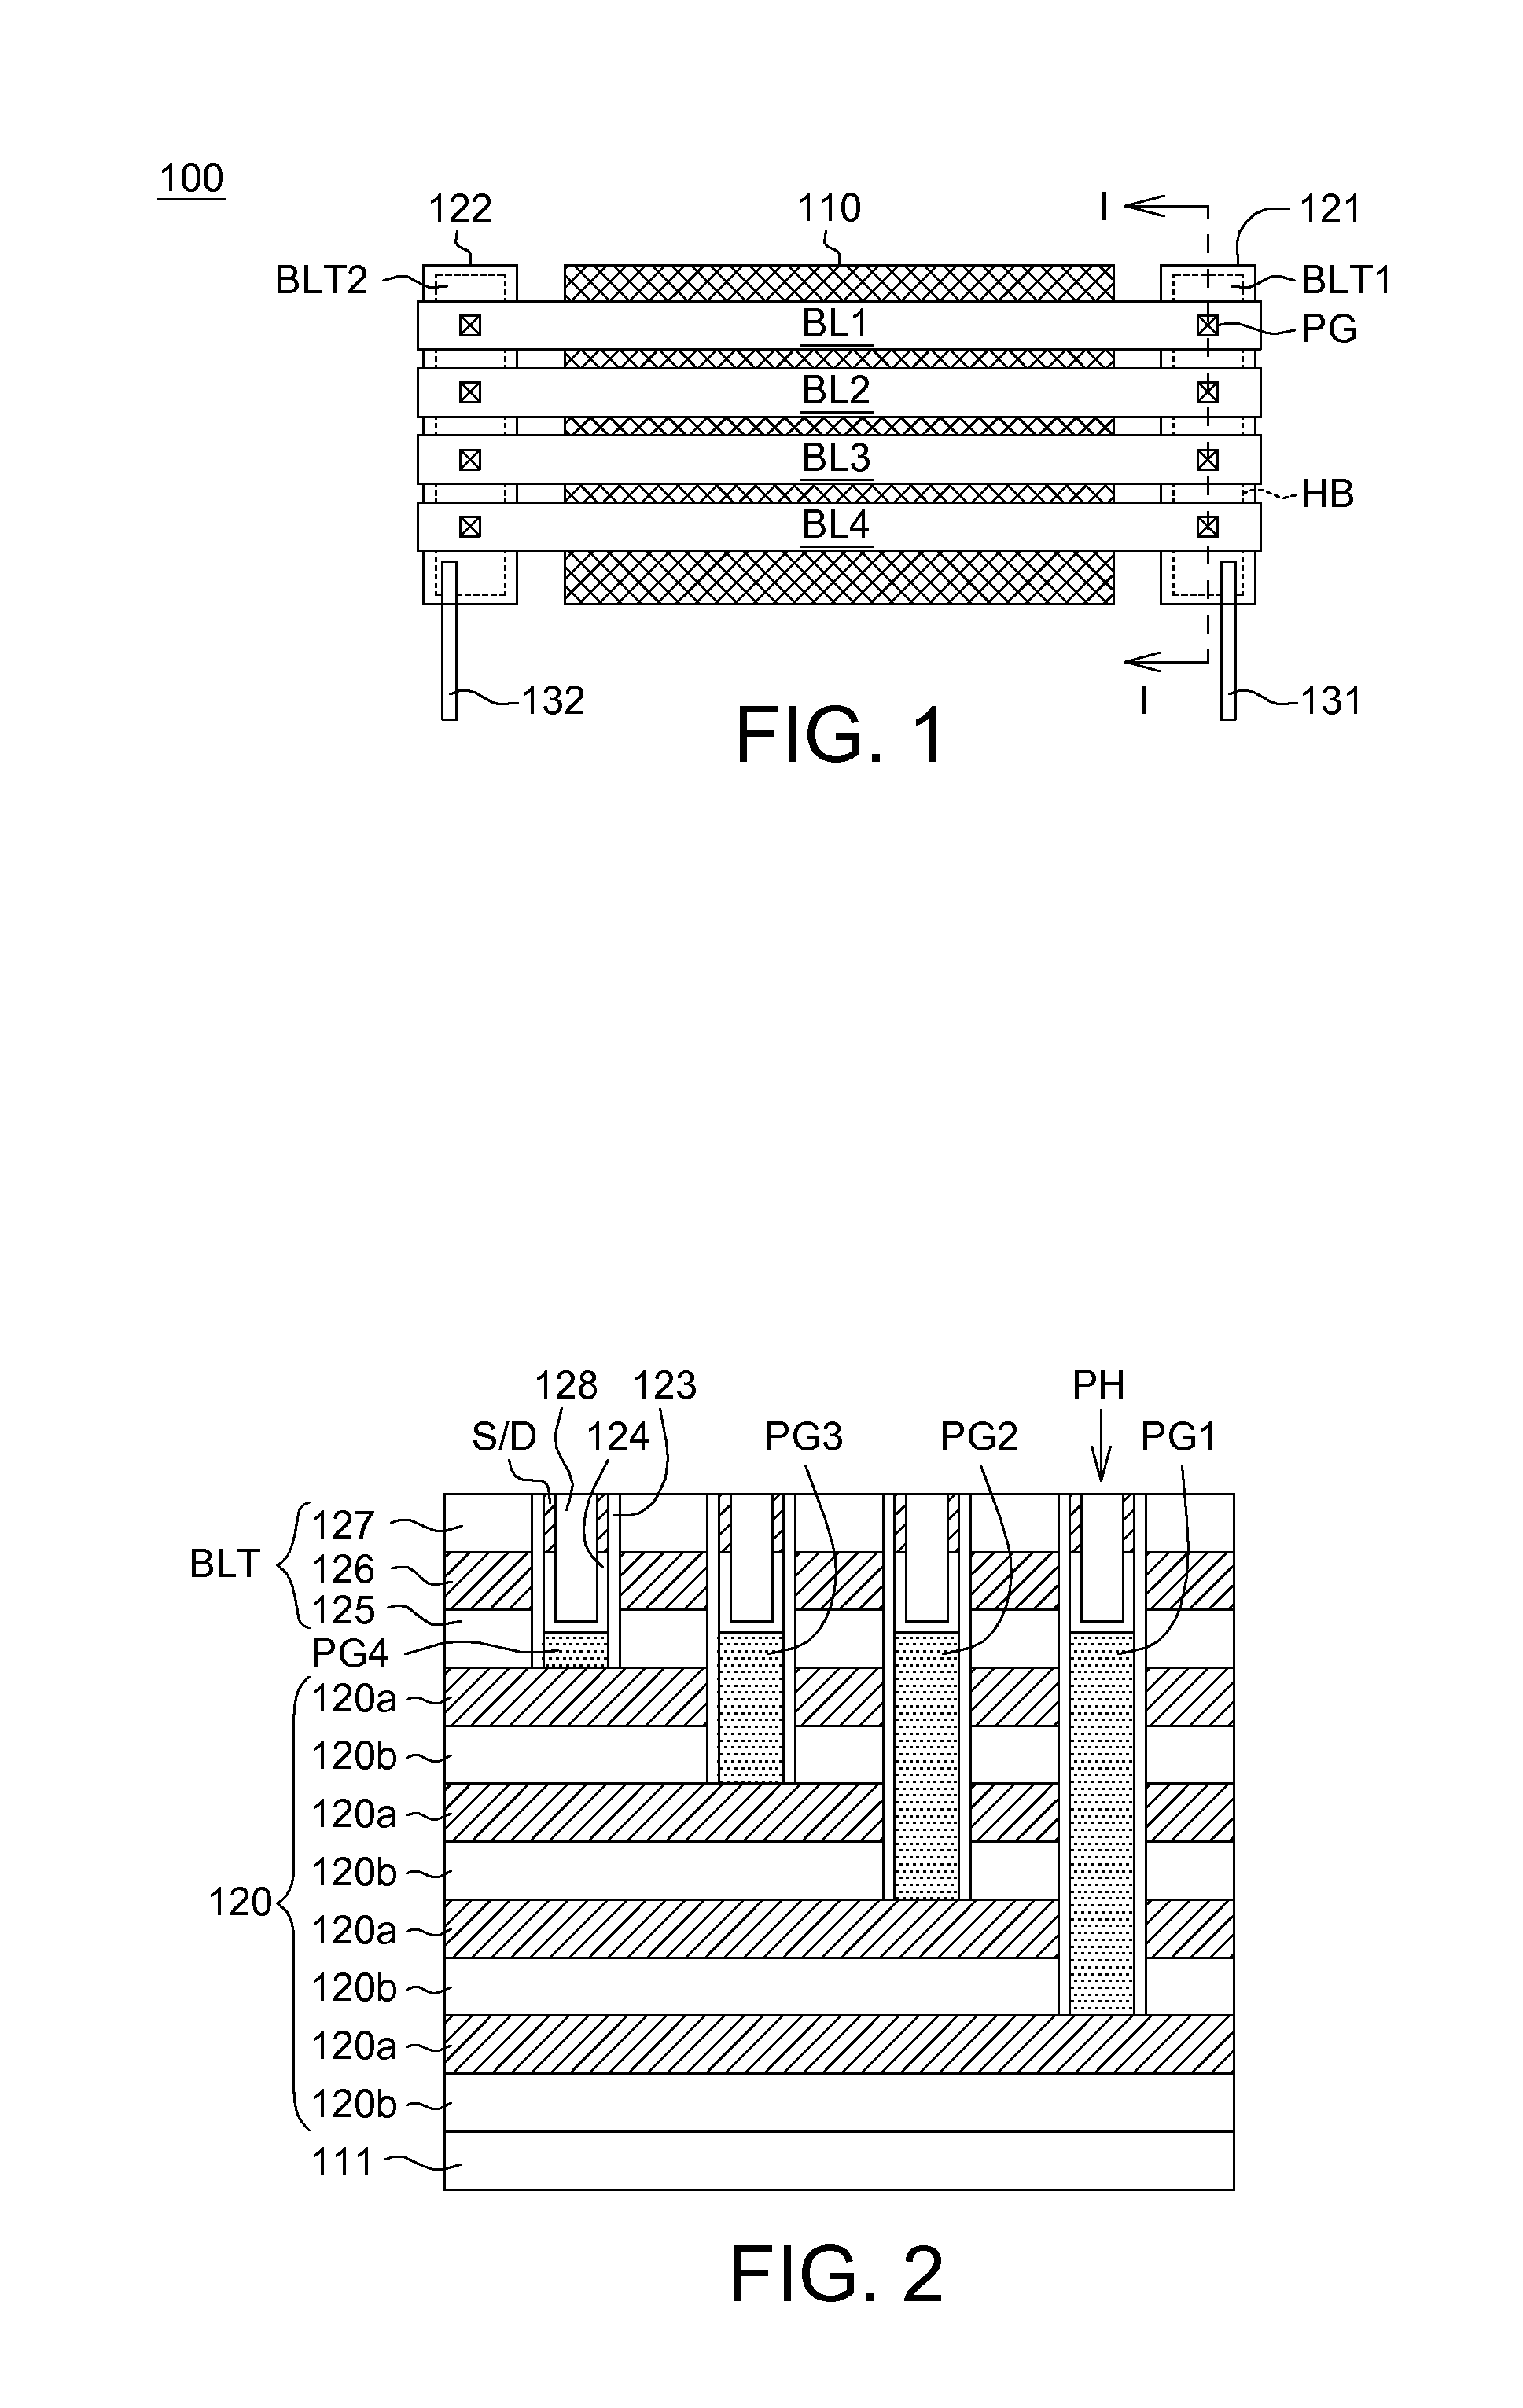 Semiconductor structure with improved capacitance of bit line